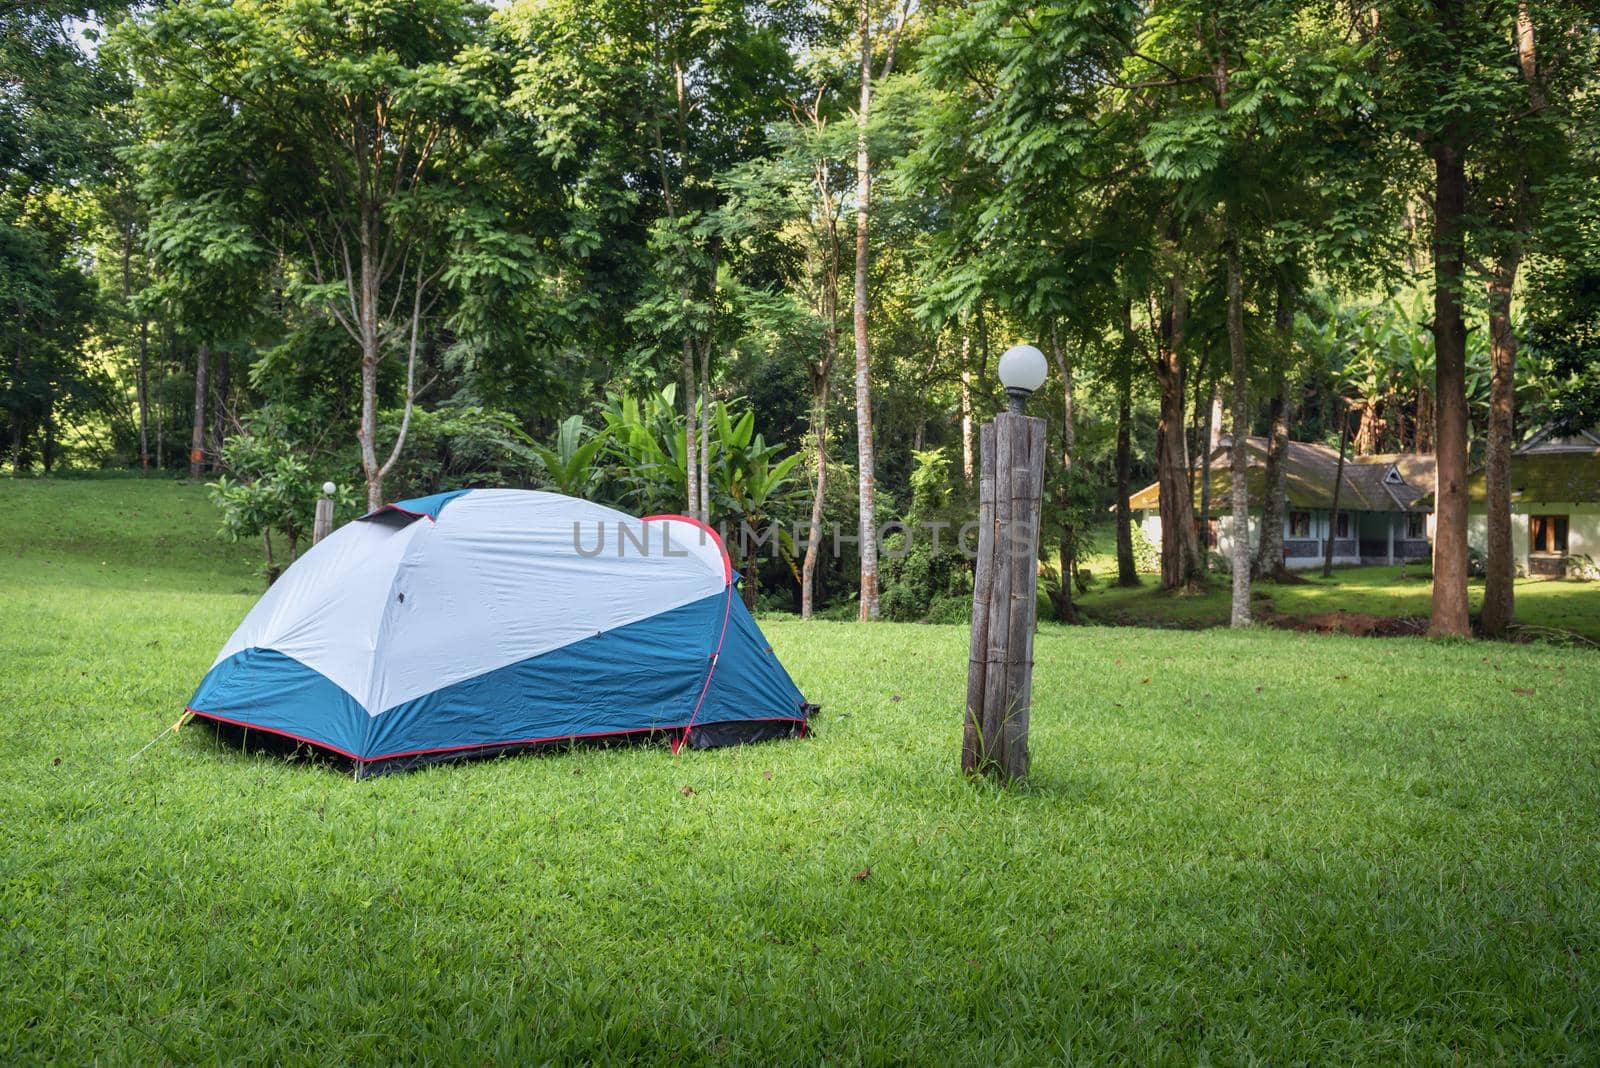 Camping Campsite and Tent on Green Grass Under The Trees Tropical Forest, Field Campground for Vacation Outdoors Leisure Activity and Adventure. Backpack Trekking Tourist Lifestyles, Travel Adventures by MahaHeang245789